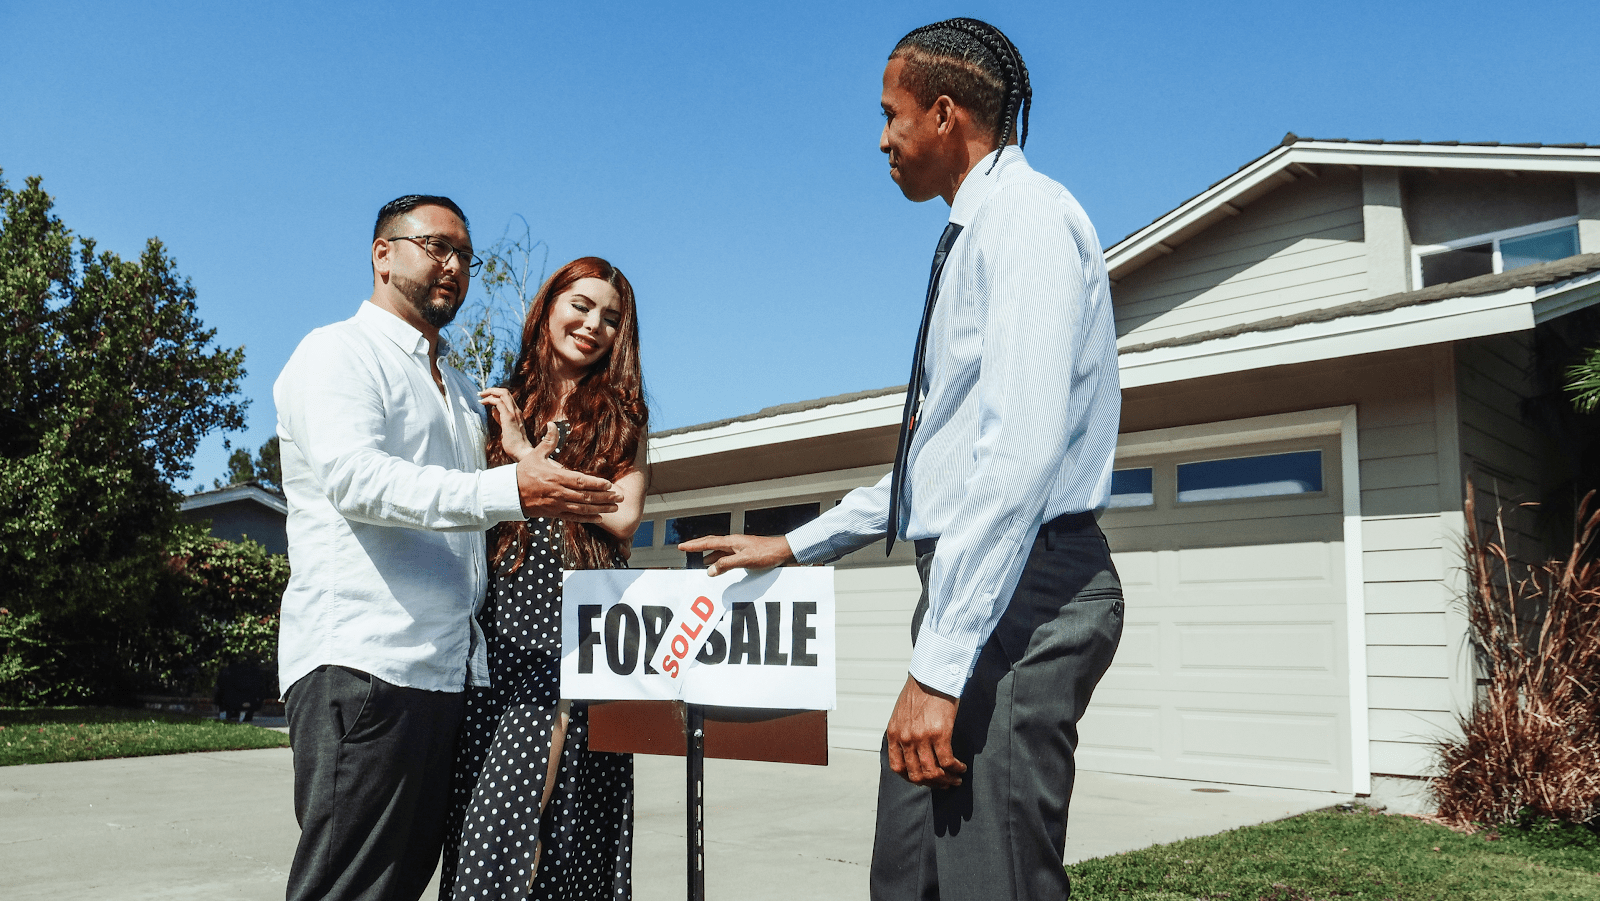 a young couple who bought a house and a realtor change the "for sale" sign to "sold"